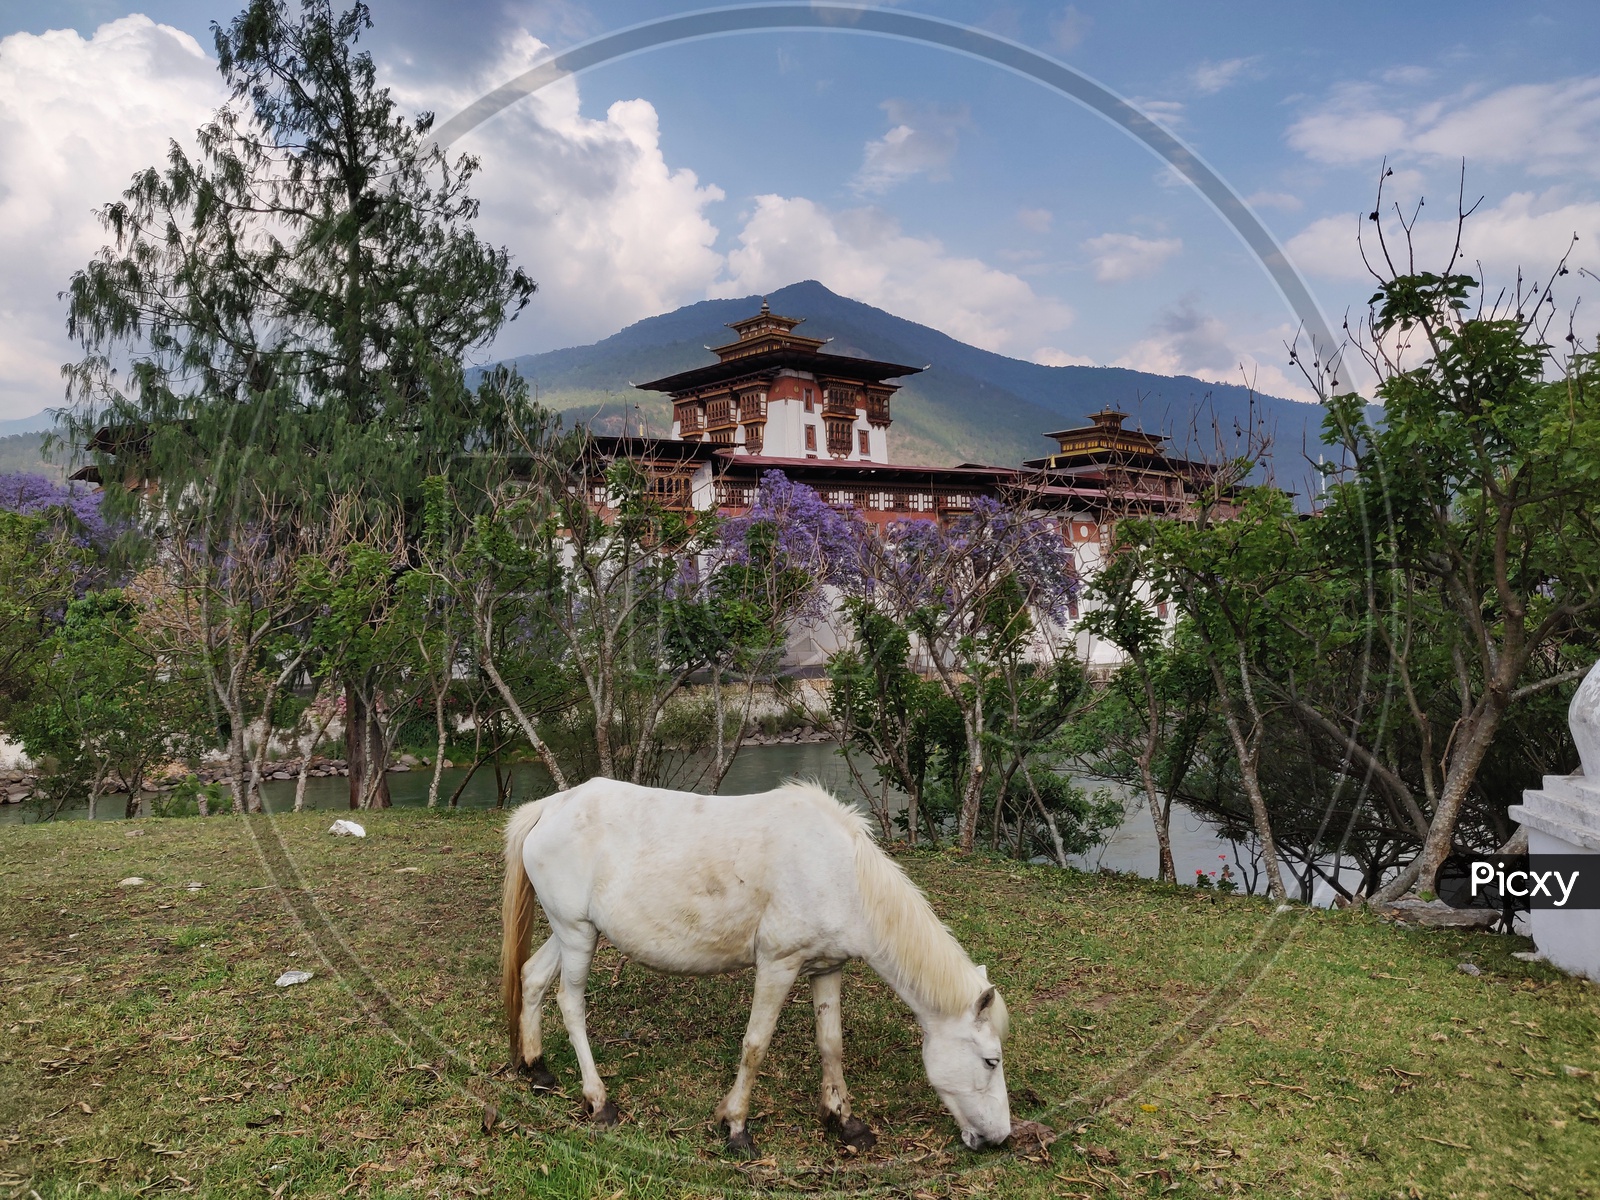 A Horse and a monastery in the background